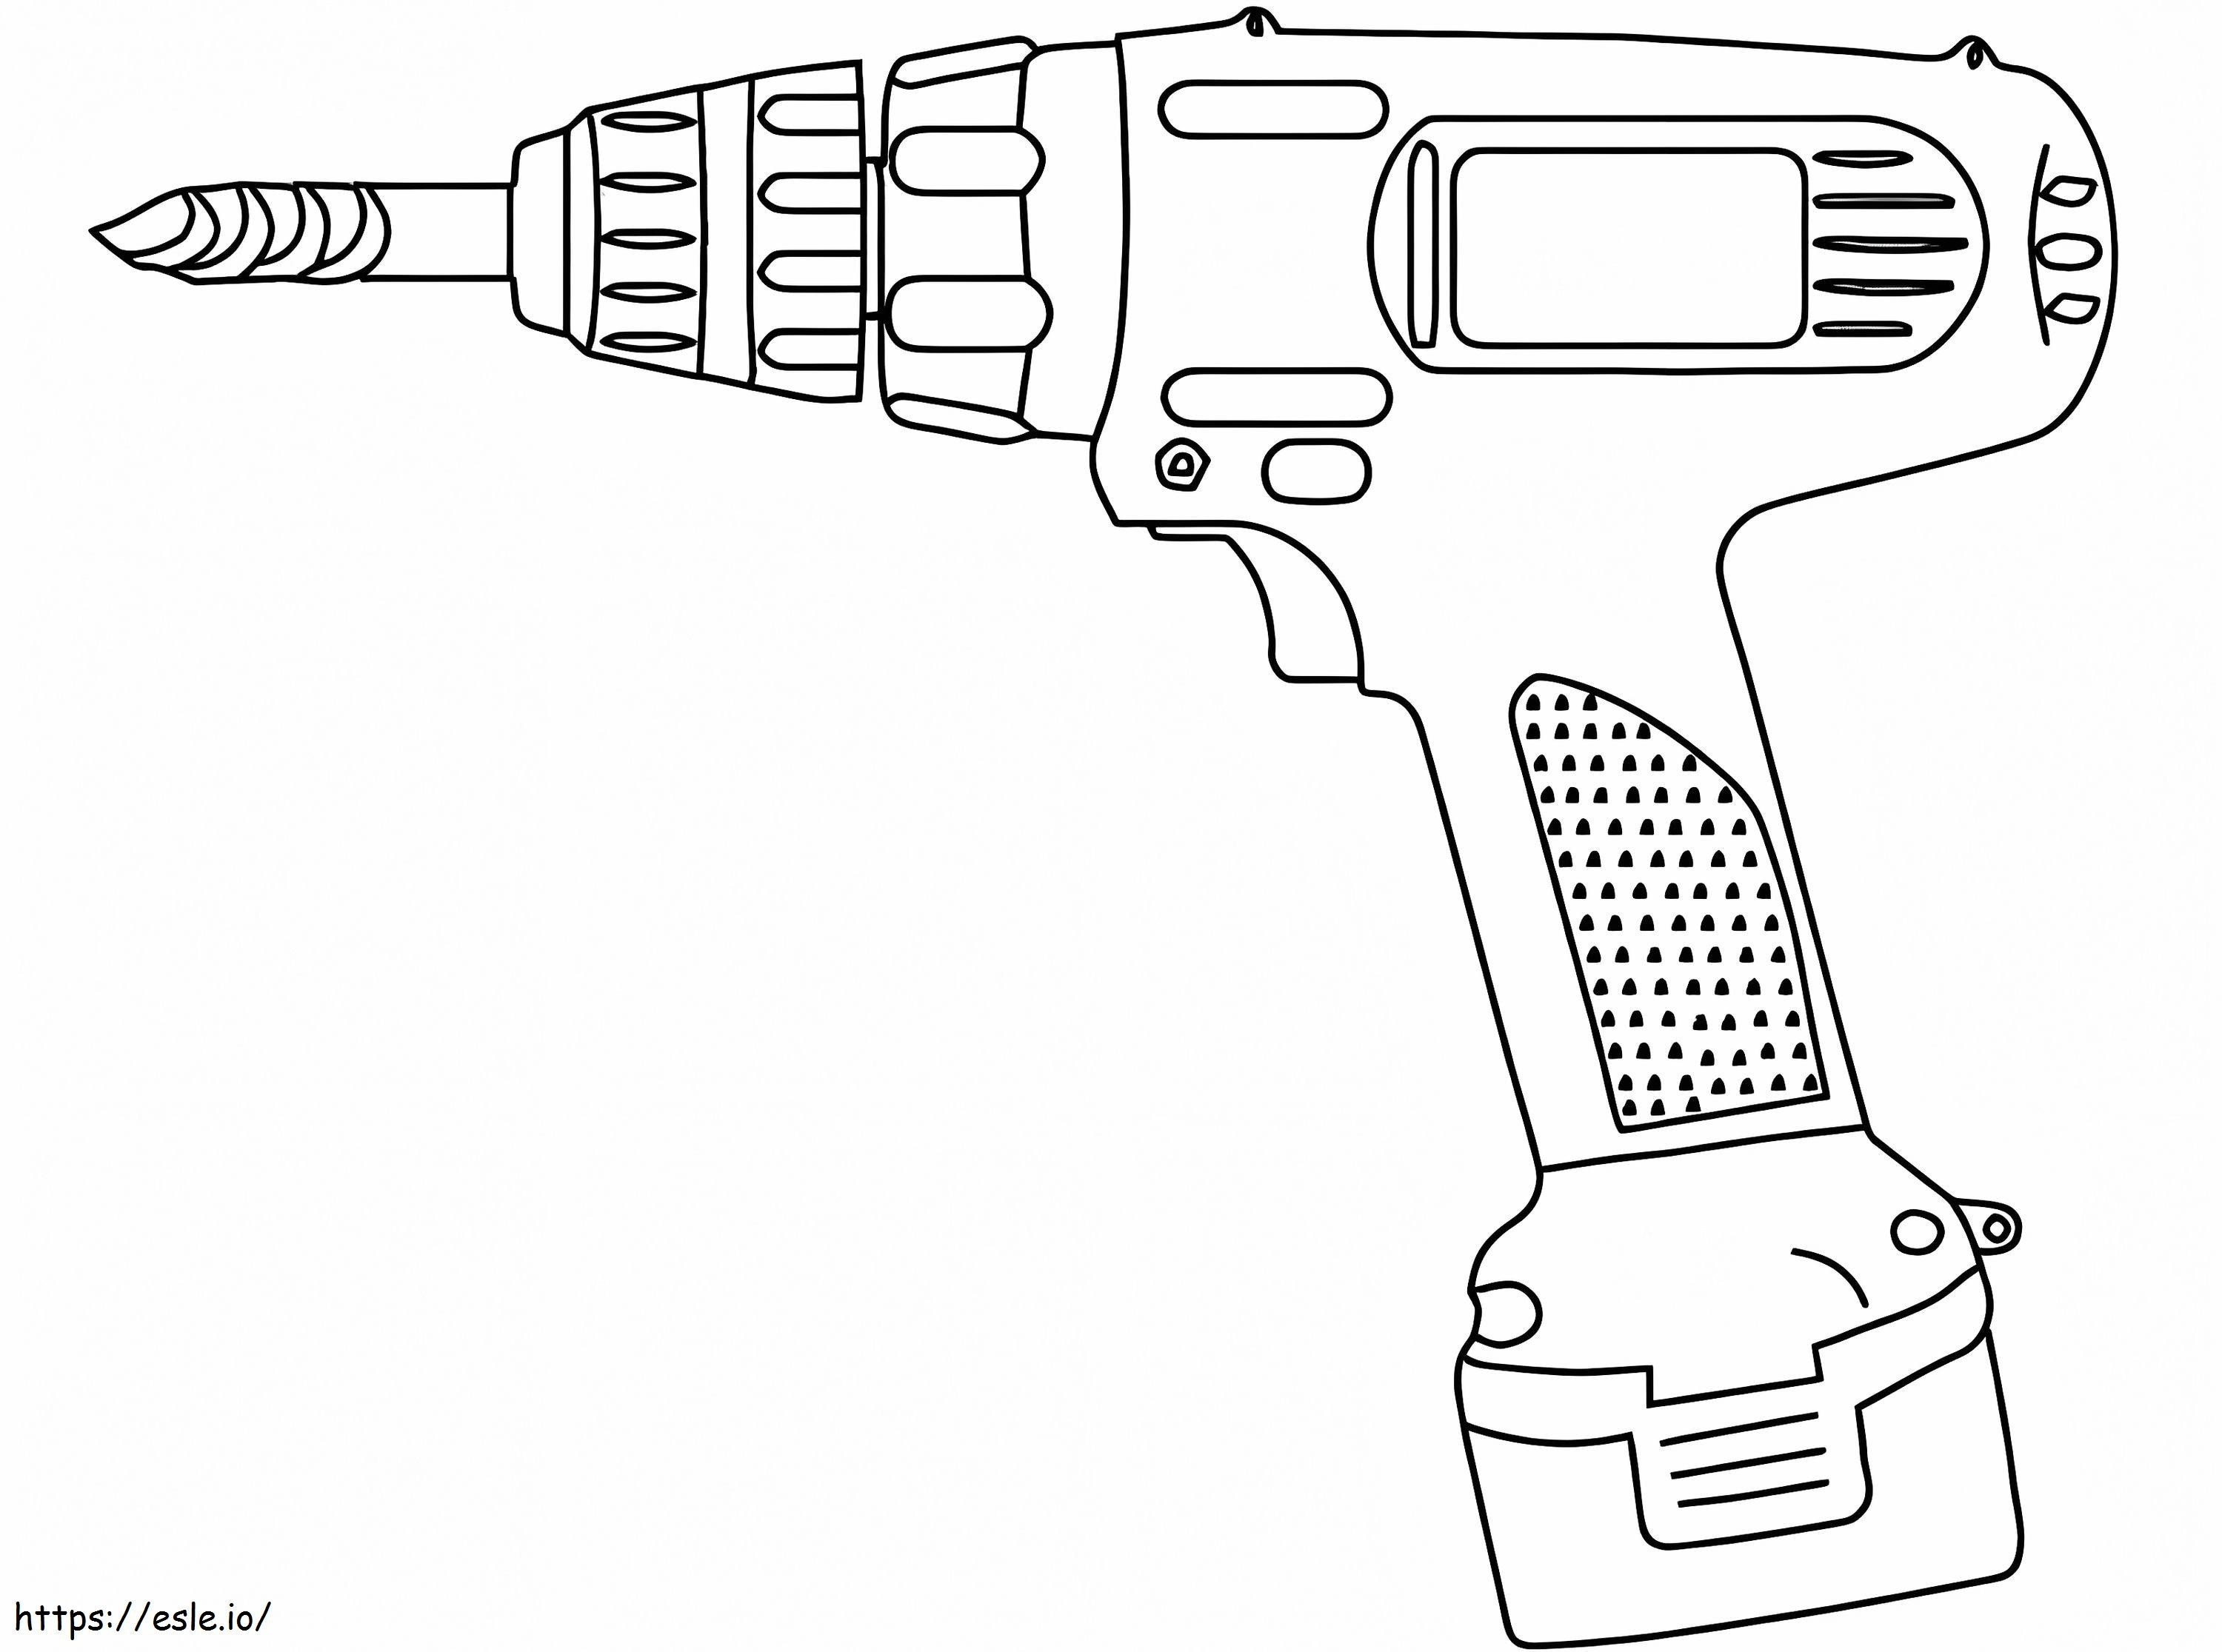 Cordless Drill coloring page